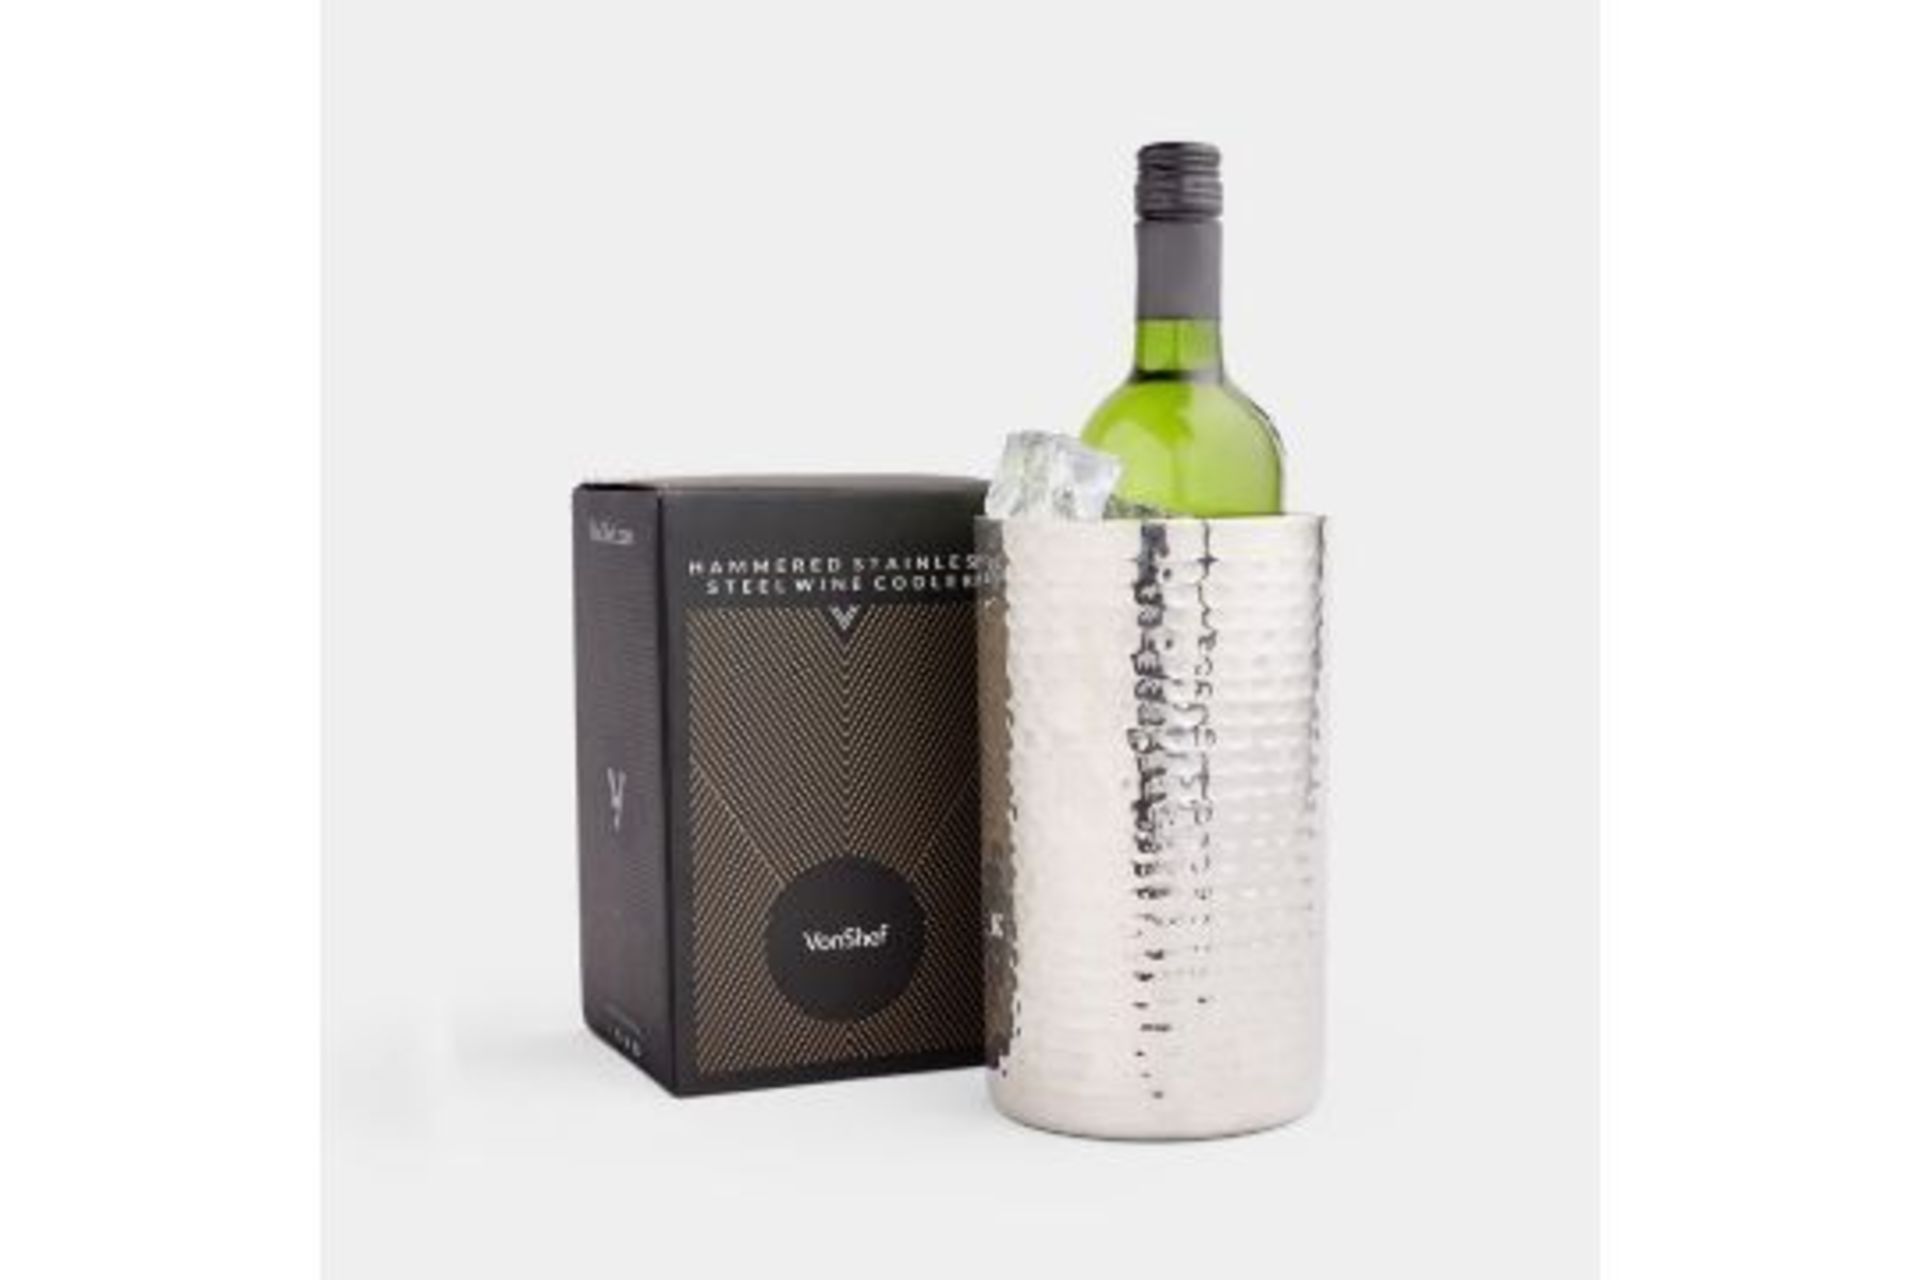 Hammered Stainless Steel Wine Cooler. - 14.10. Level up your home party serving game with our